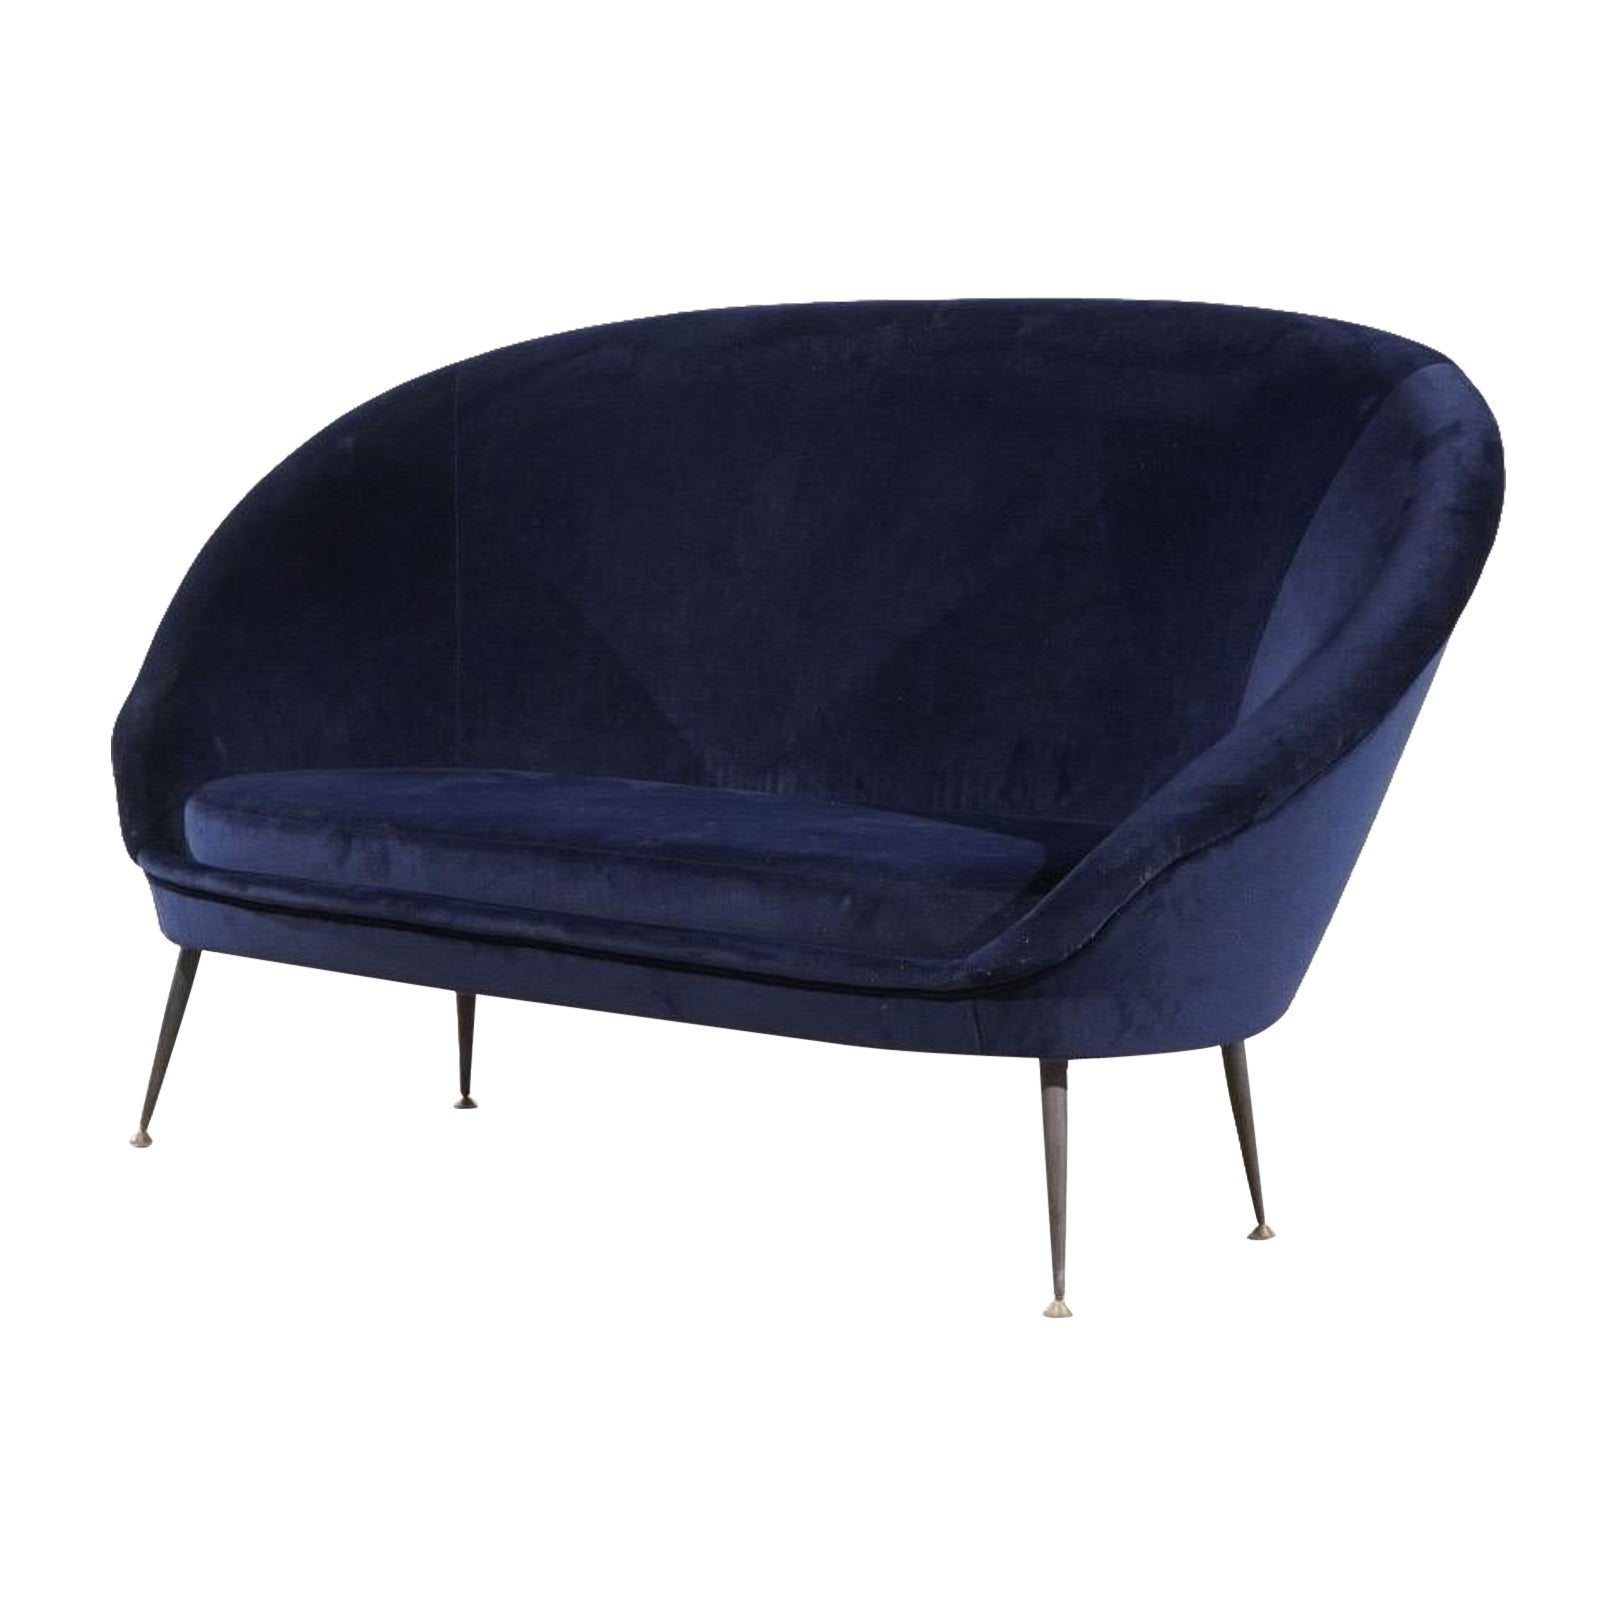 Italian Design Two Seater Sofa Blue Velour Italy Midcentury Free Standing Legs For Sale